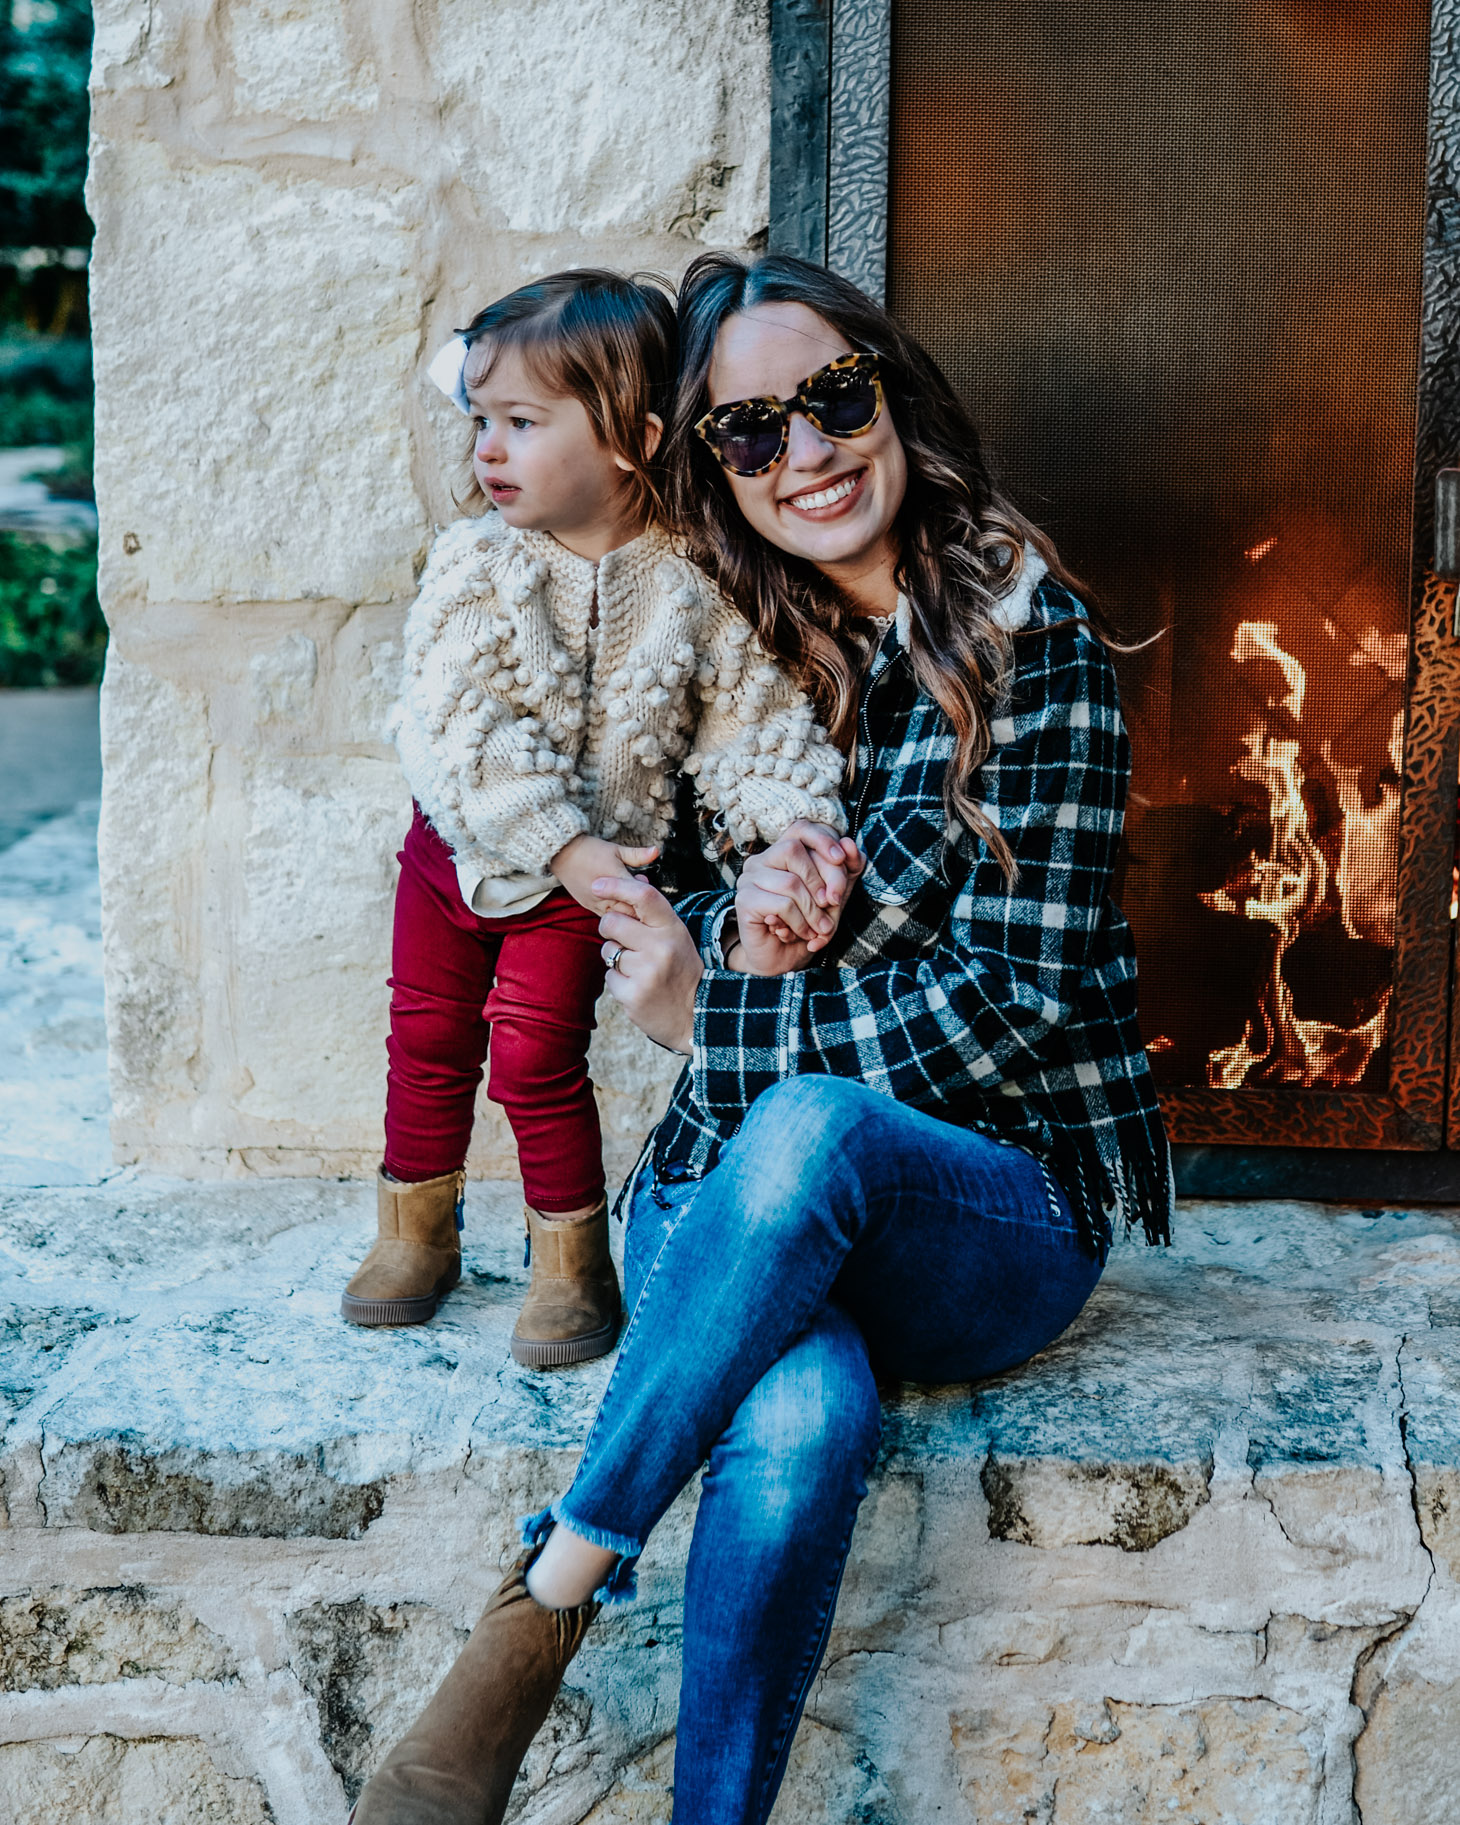 San Antonio in Winter featured by top US travel blog Lone Star Looking Glass; Image of a mother and daughter sitting by the fire.